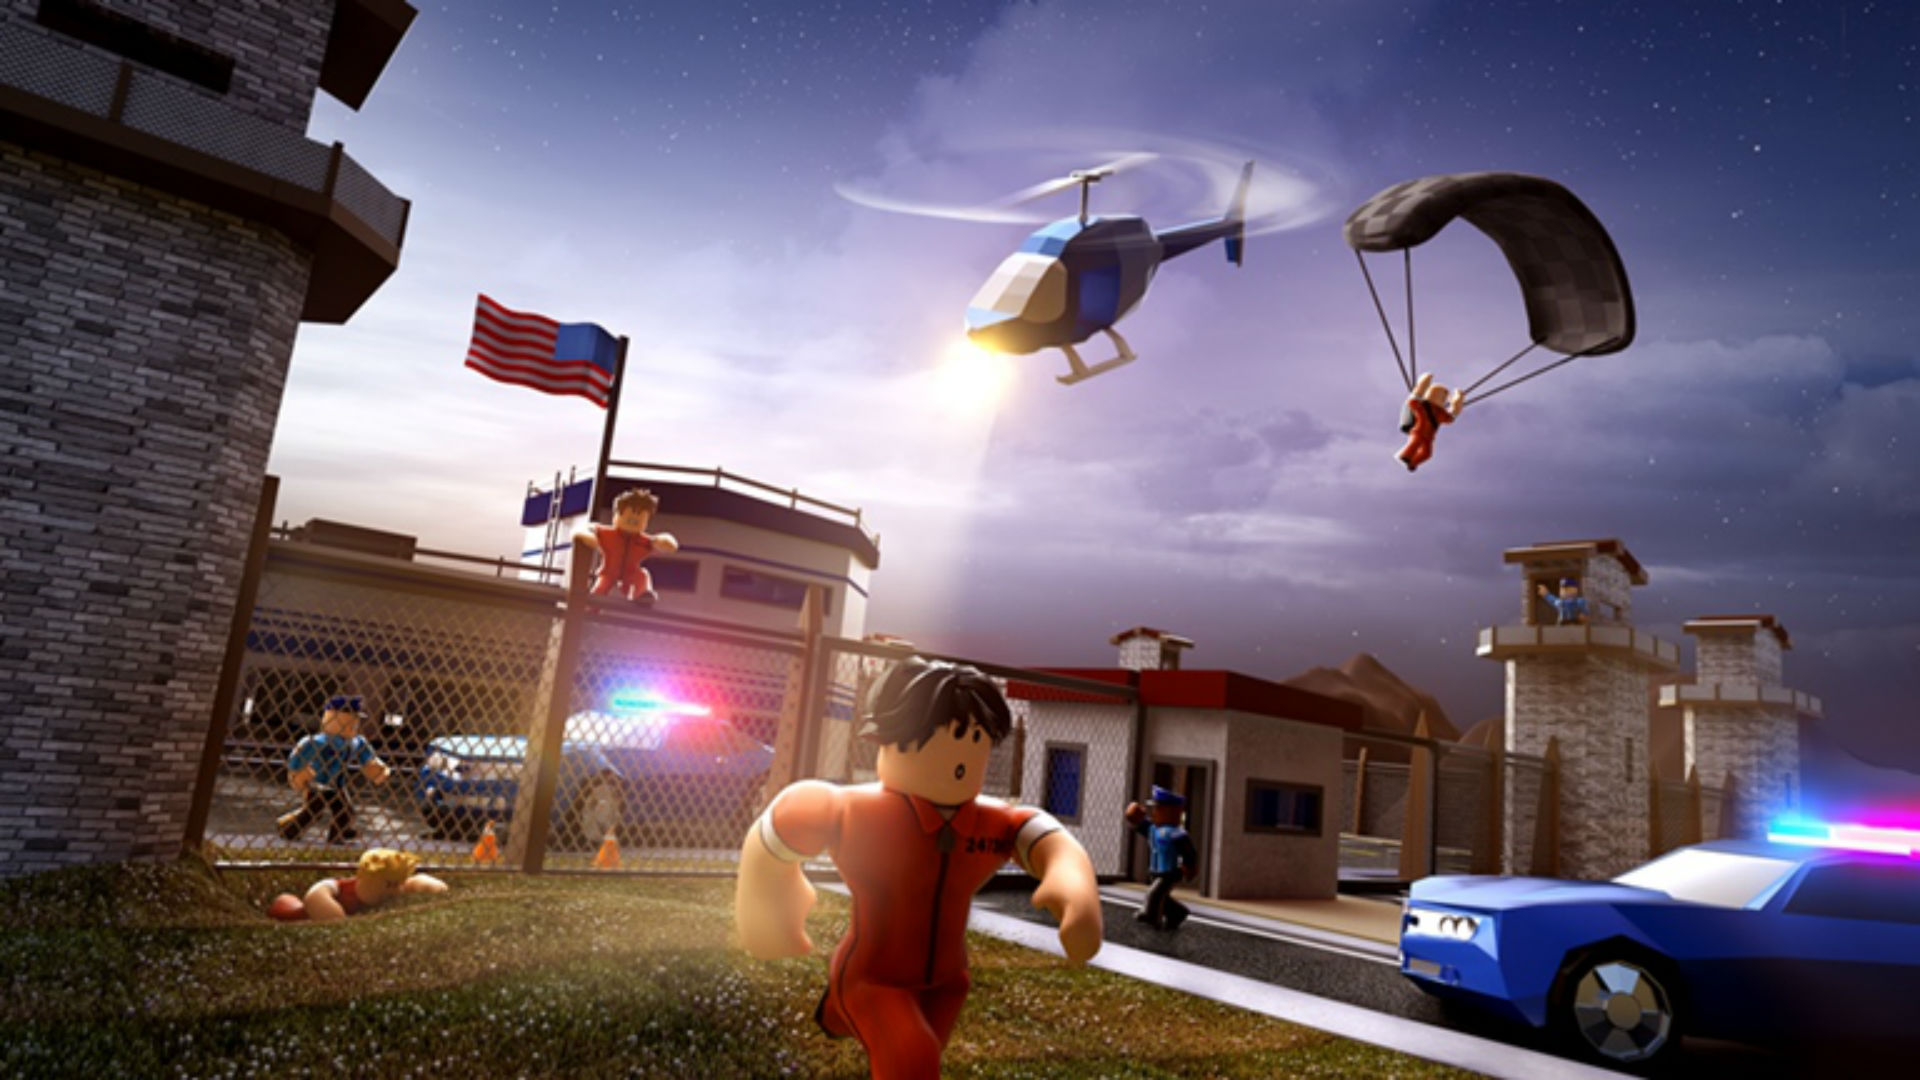 Roblox reaches 150 million monthly active users (that's more than Minecraft)